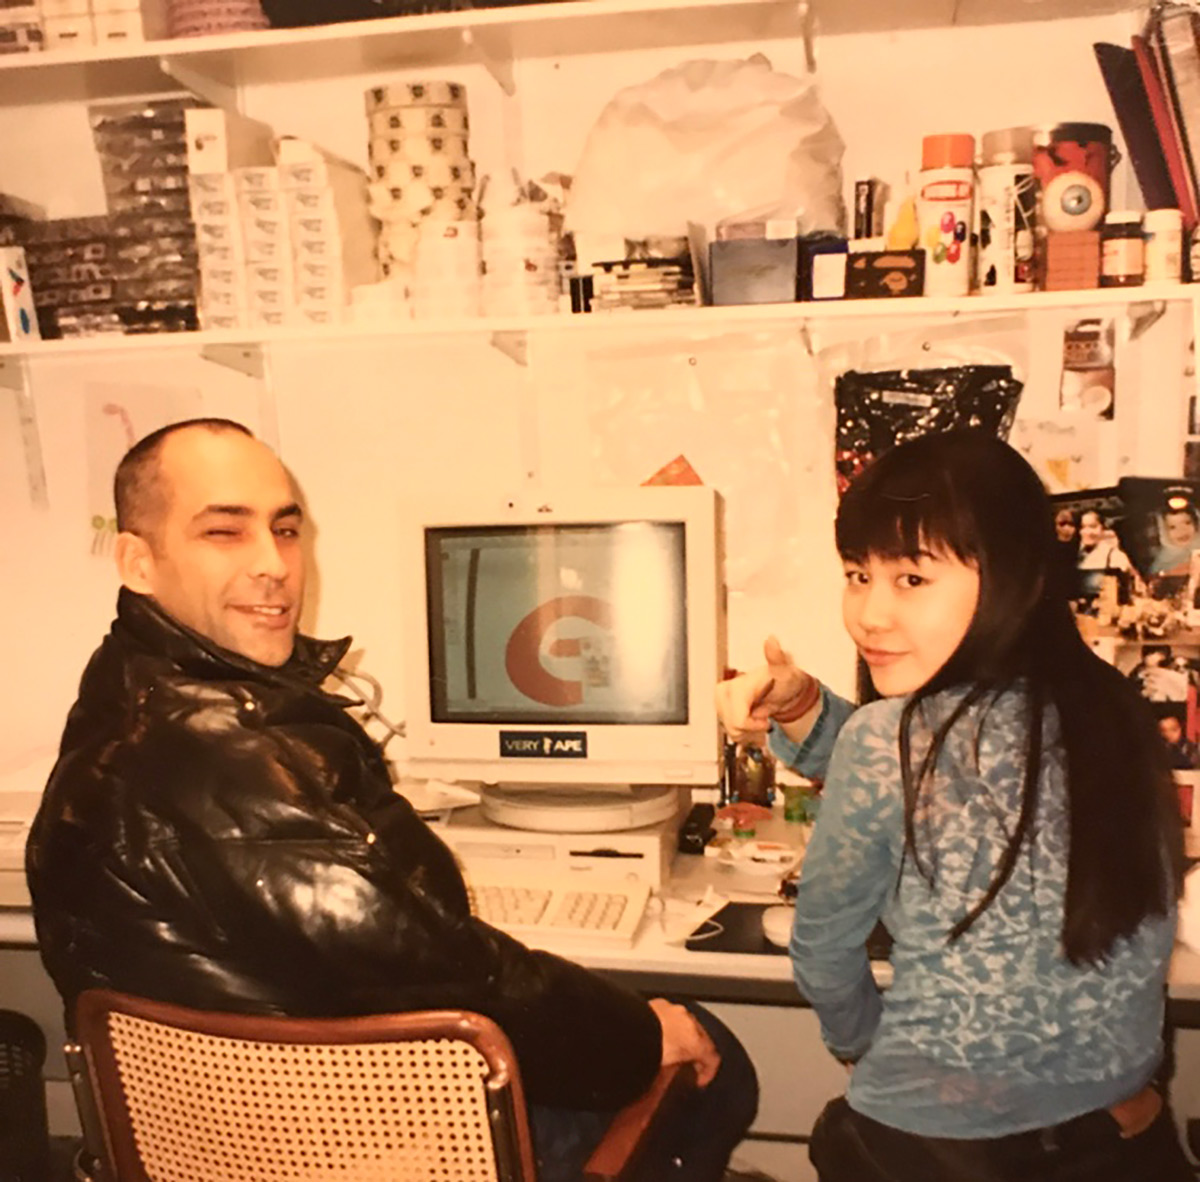 Hitomi Yokoyama with James Lebon sitting in front of a computer